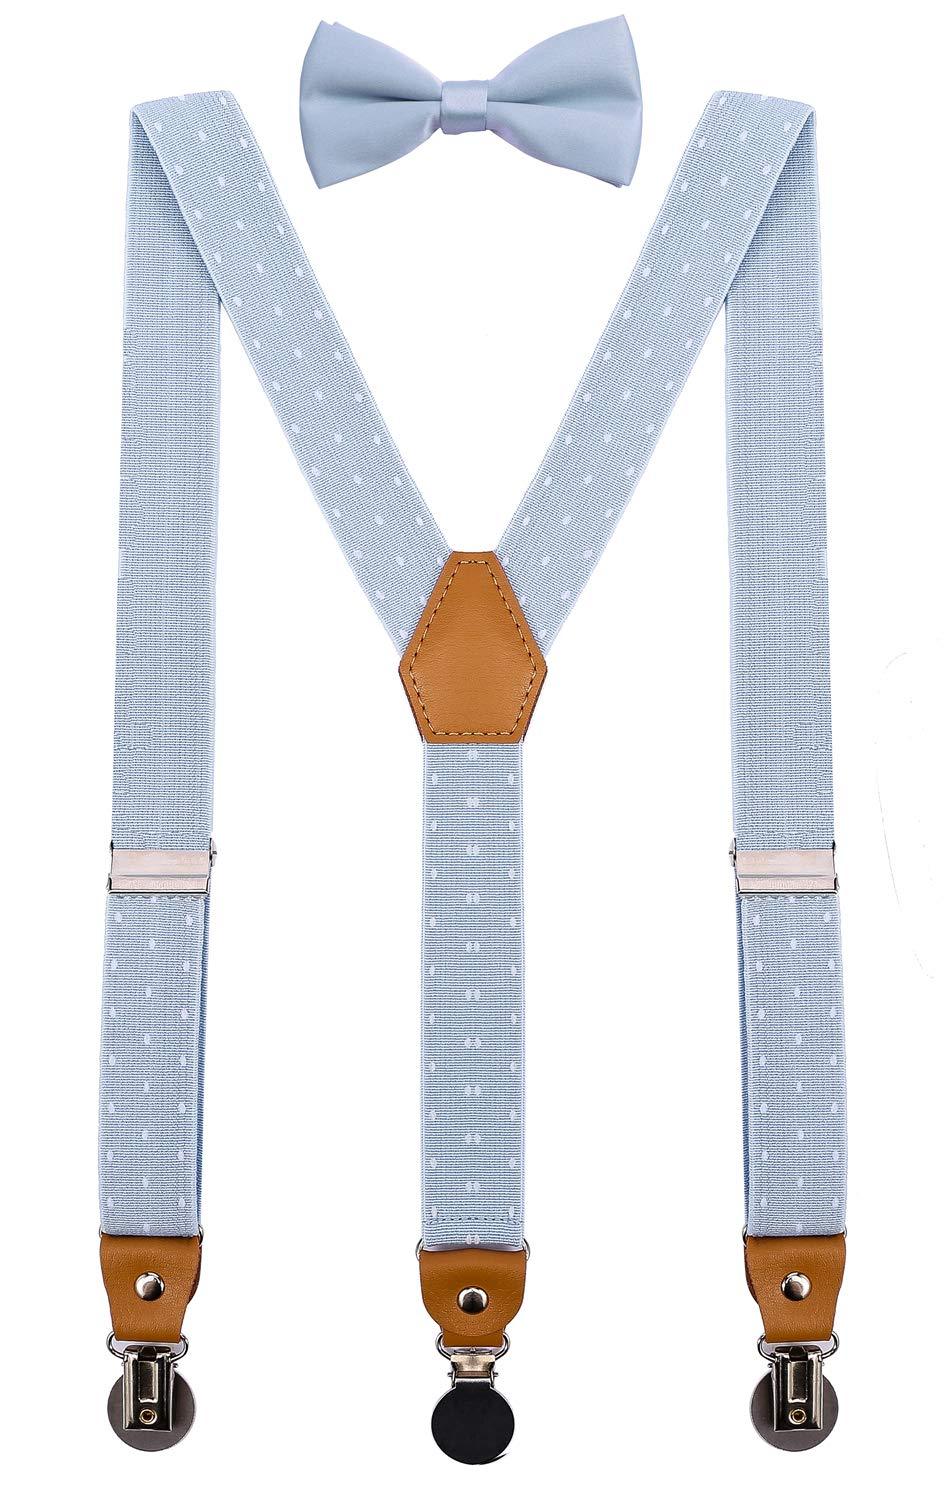 [Australia] - CEAJOO Men Boys Suspenders and Bow Tie Set Adjustable with Round Metal Clips S: 24" (6 month-3 yrs) 1_ Blue White Polka Dot 